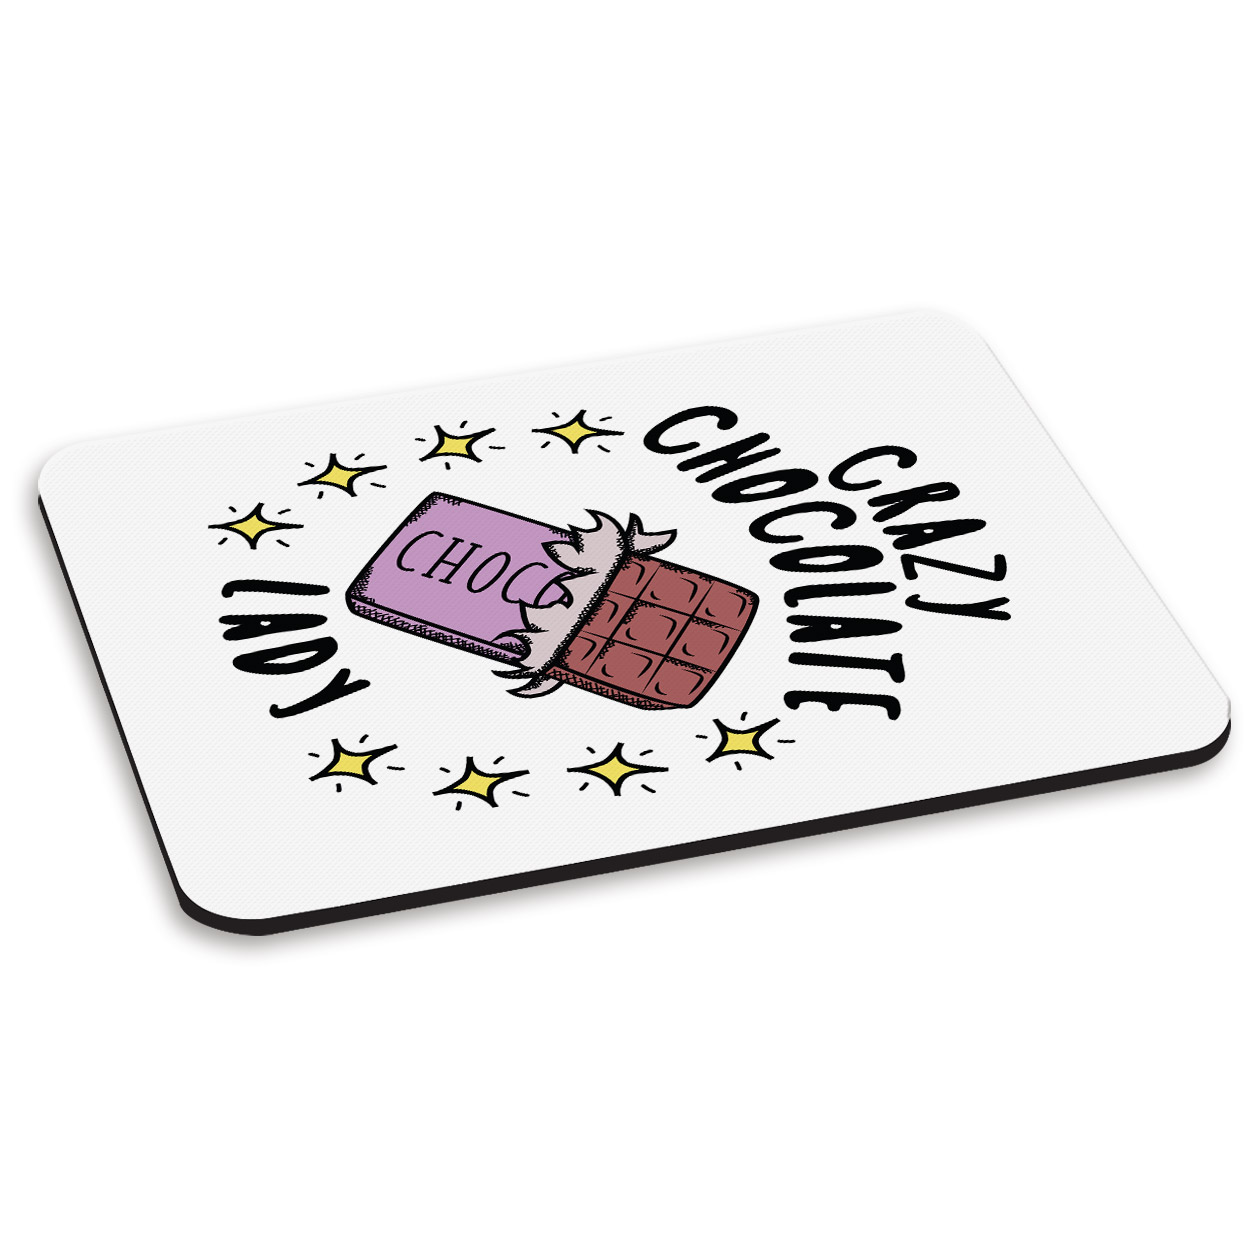 Crazy Cookie Homme Stars Coaster Drinks Tapis Drôle Blague Food Lover chocolat